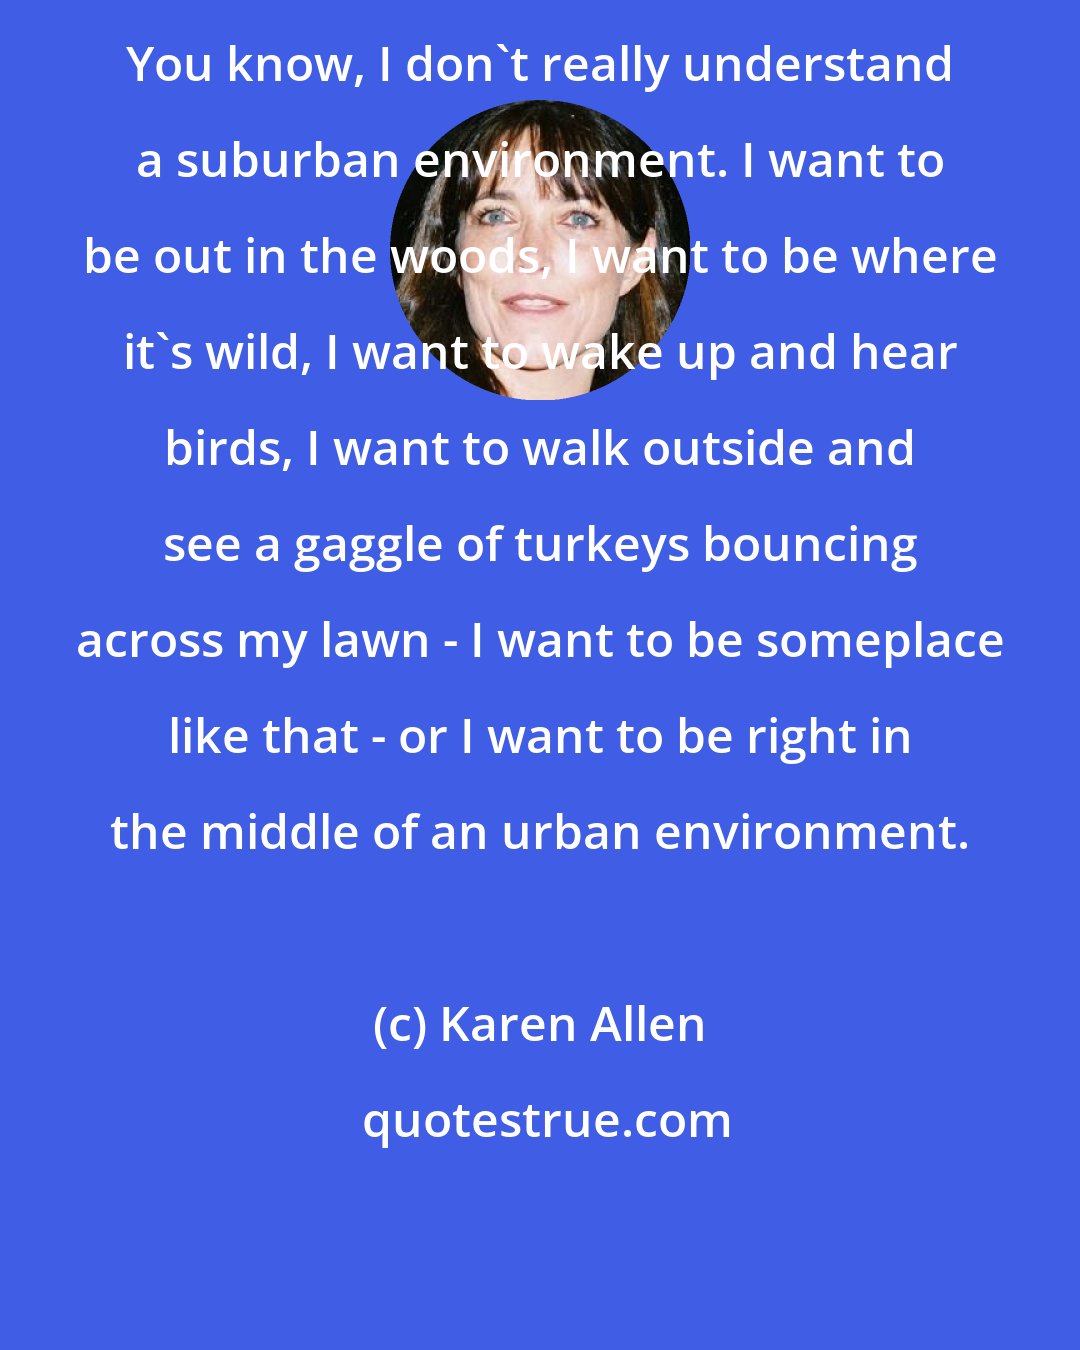 Karen Allen: You know, I don't really understand a suburban environment. I want to be out in the woods, I want to be where it's wild, I want to wake up and hear birds, I want to walk outside and see a gaggle of turkeys bouncing across my lawn - I want to be someplace like that - or I want to be right in the middle of an urban environment.